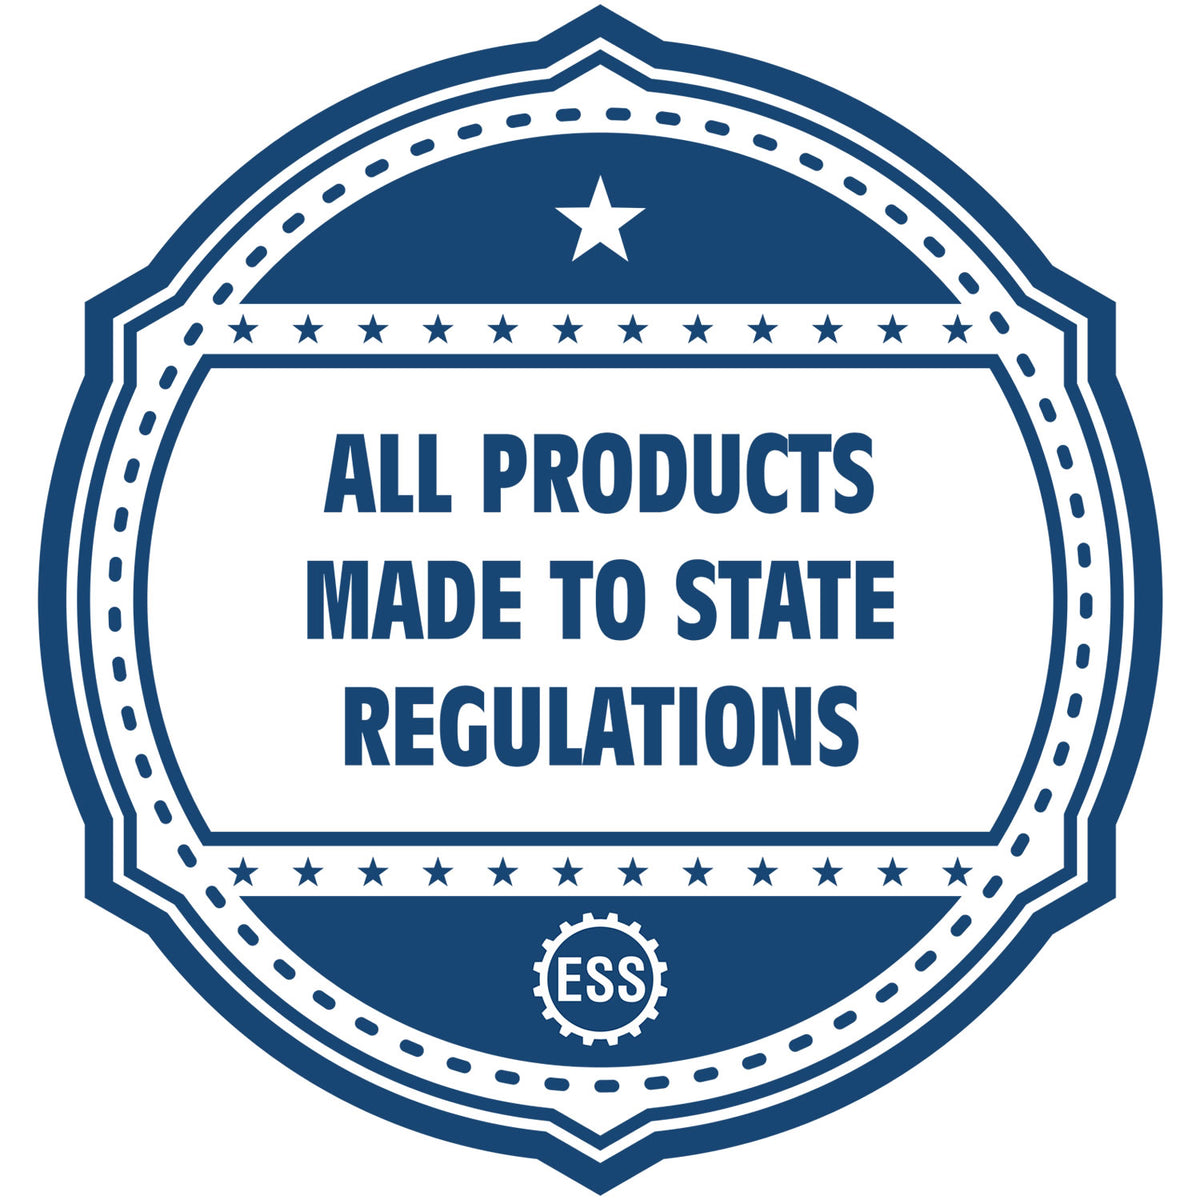 An icon or badge element for the Long Reach New York PE Seal showing that this product is made in compliance with state regulations.